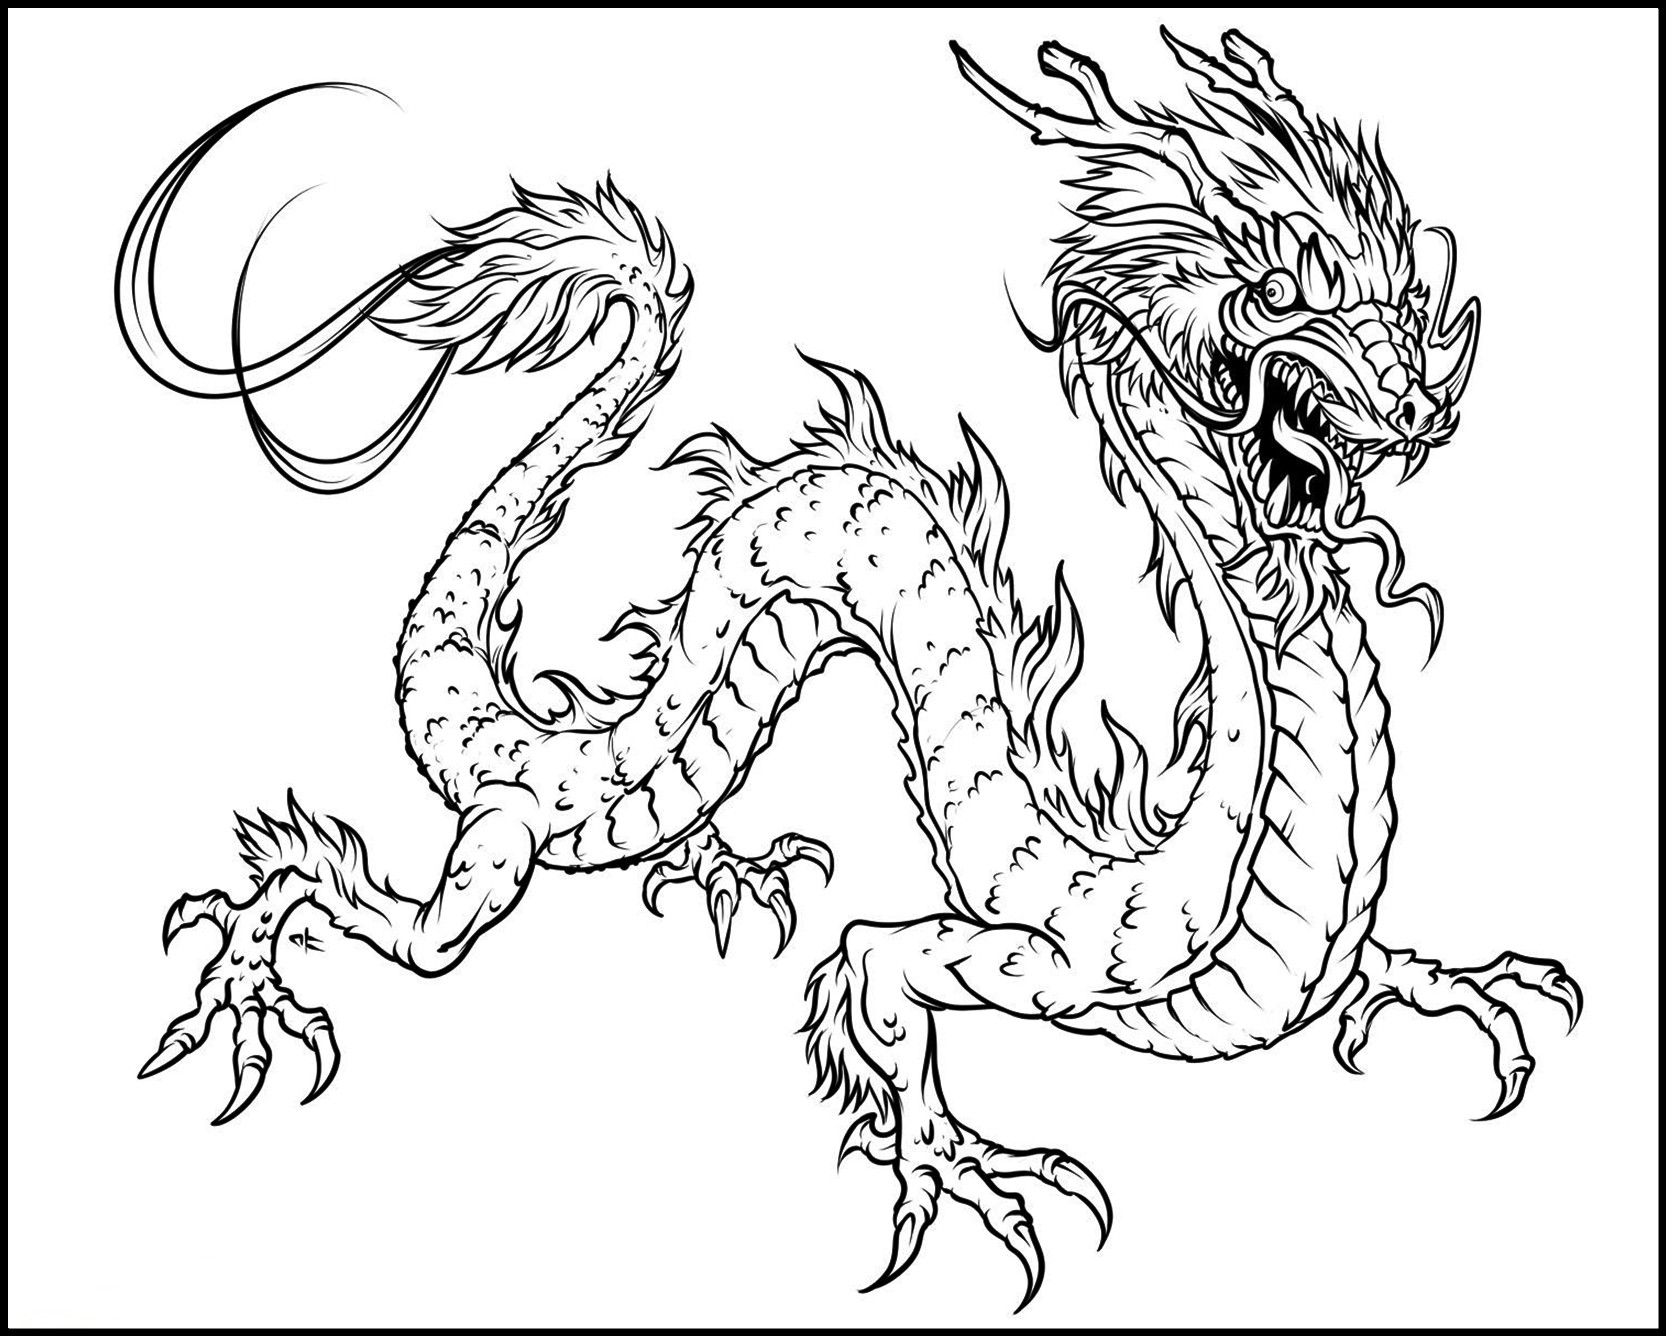 China's Dragon Coloring Page   Free Printable Coloring Pages for Kids